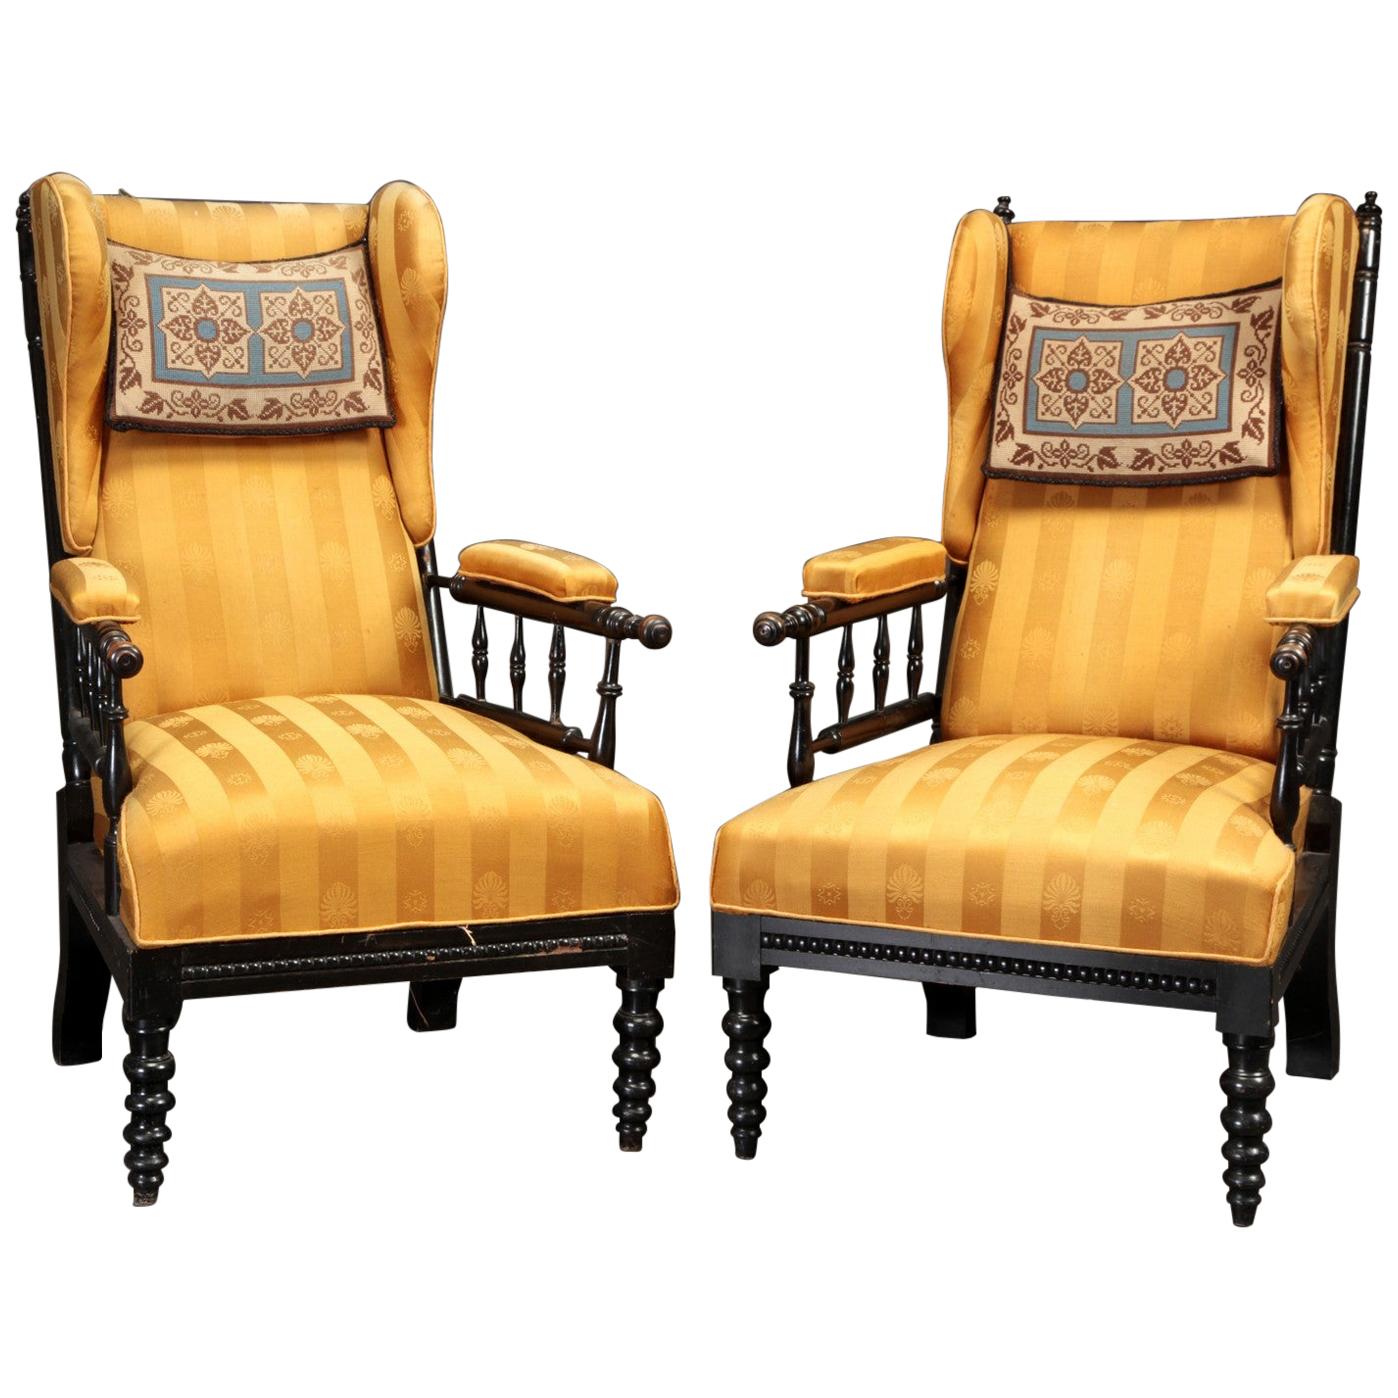 Pair of Aesthetic Wingback Chairs